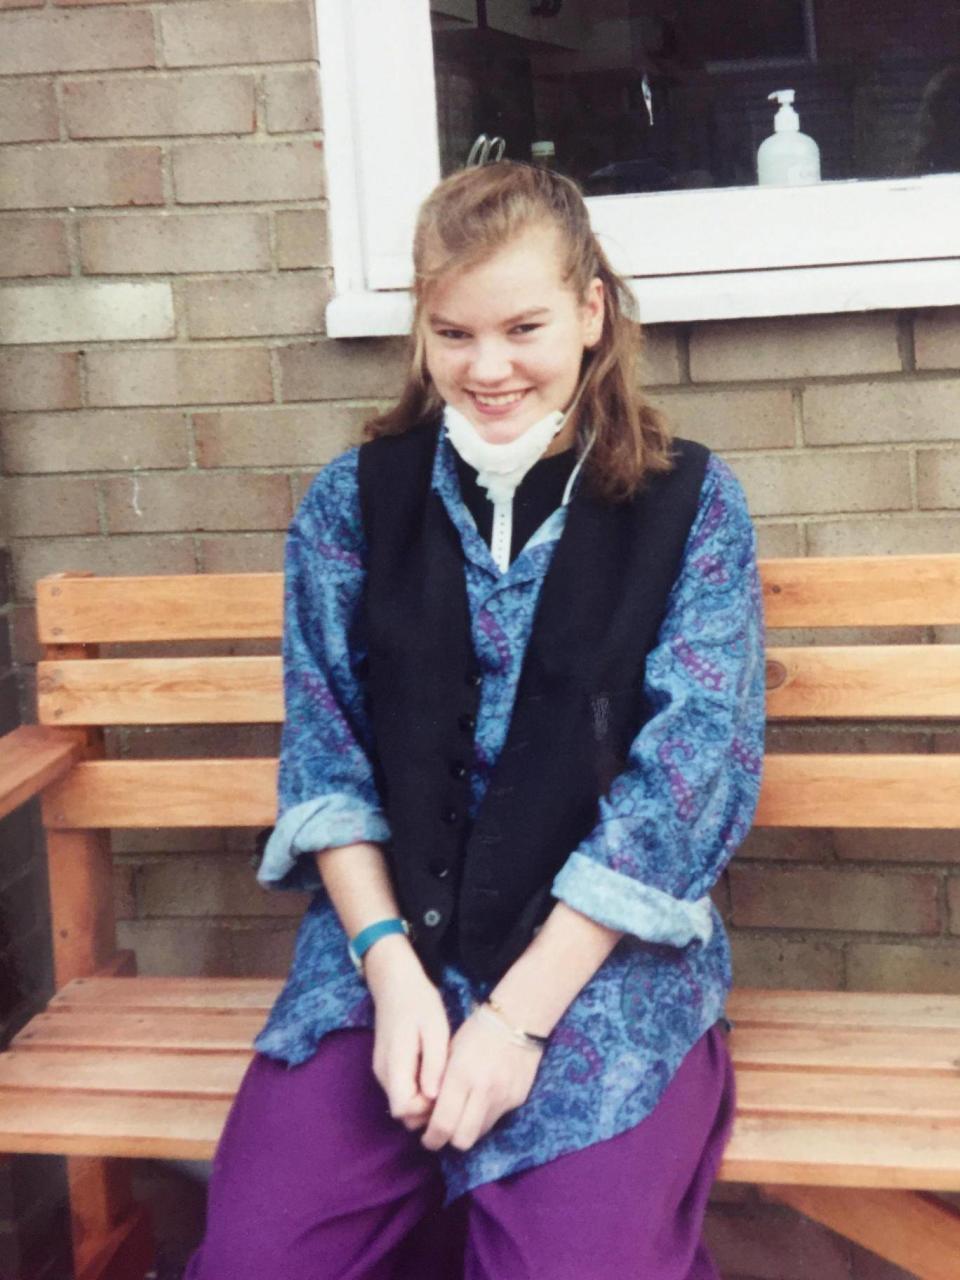 Liz Brown was told at 14 that she shouldn't expect to survive into adulthood (SWNS)